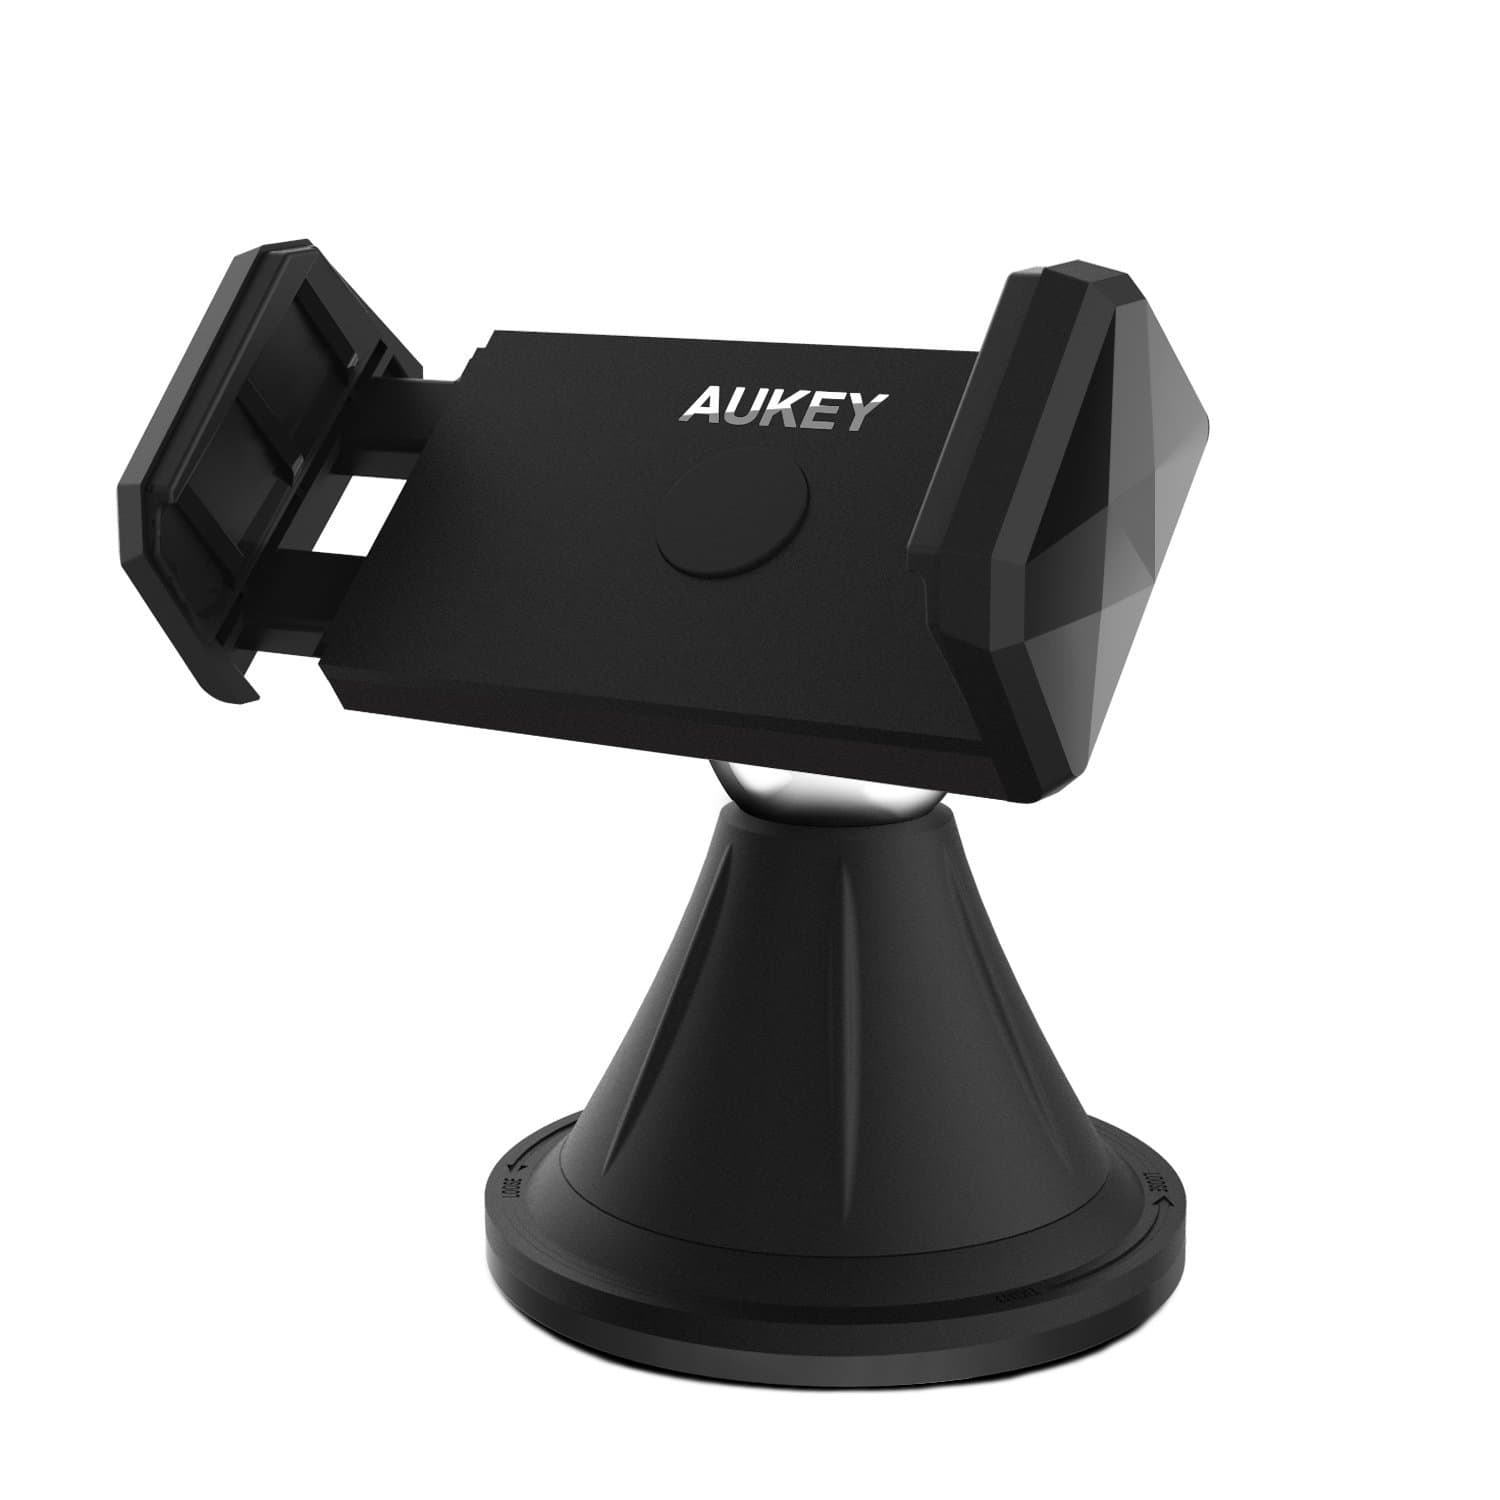 AUKEY HD-C18 Windshield Dashboard Car Mount Holder - Aukey Malaysia Official Store